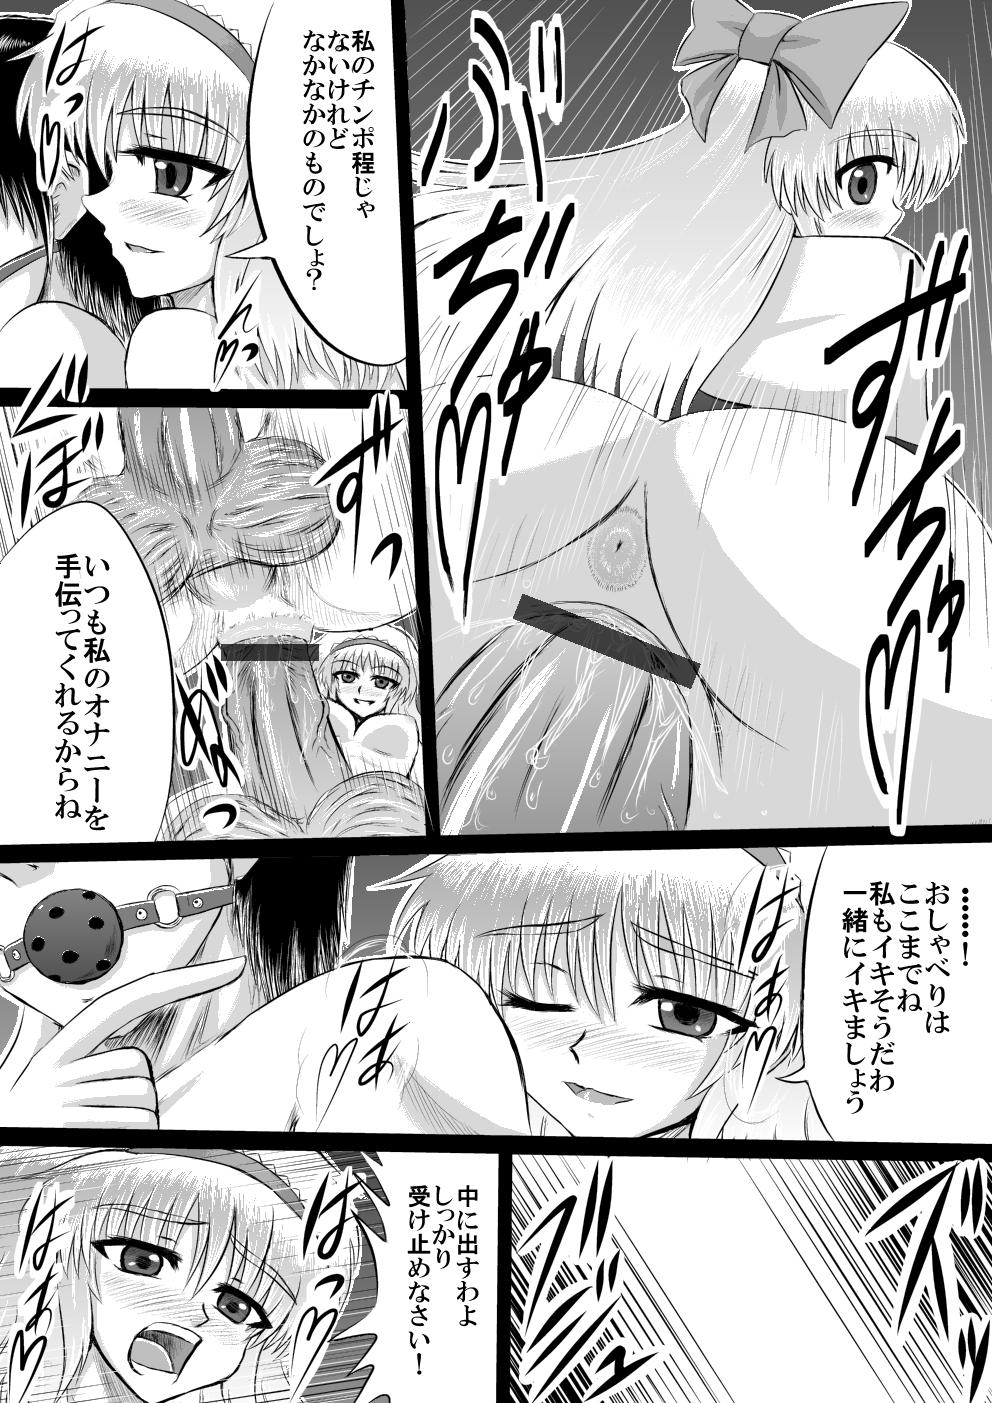 Plumper 大魔女アリス＝マーガトロイドの専属オナホ - Touhou project Emo - Page 8